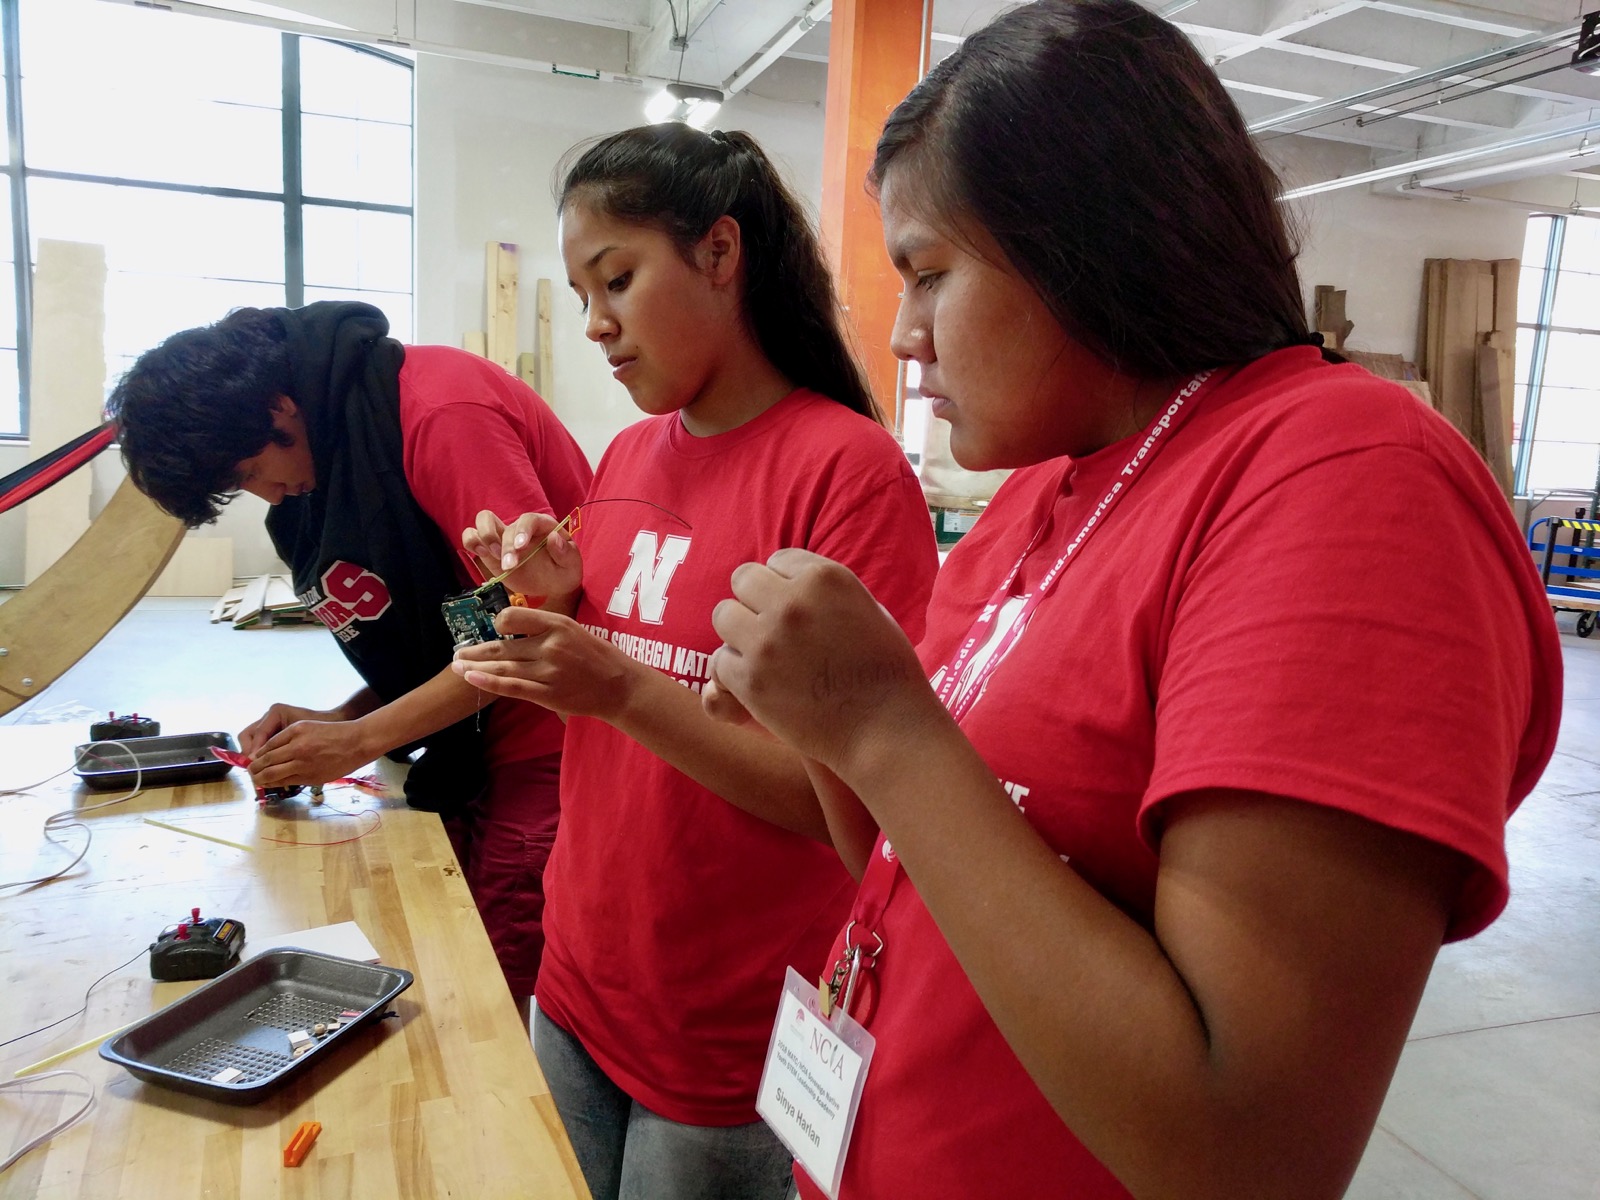 Native students learn about science in 'Sovereign' summer camp